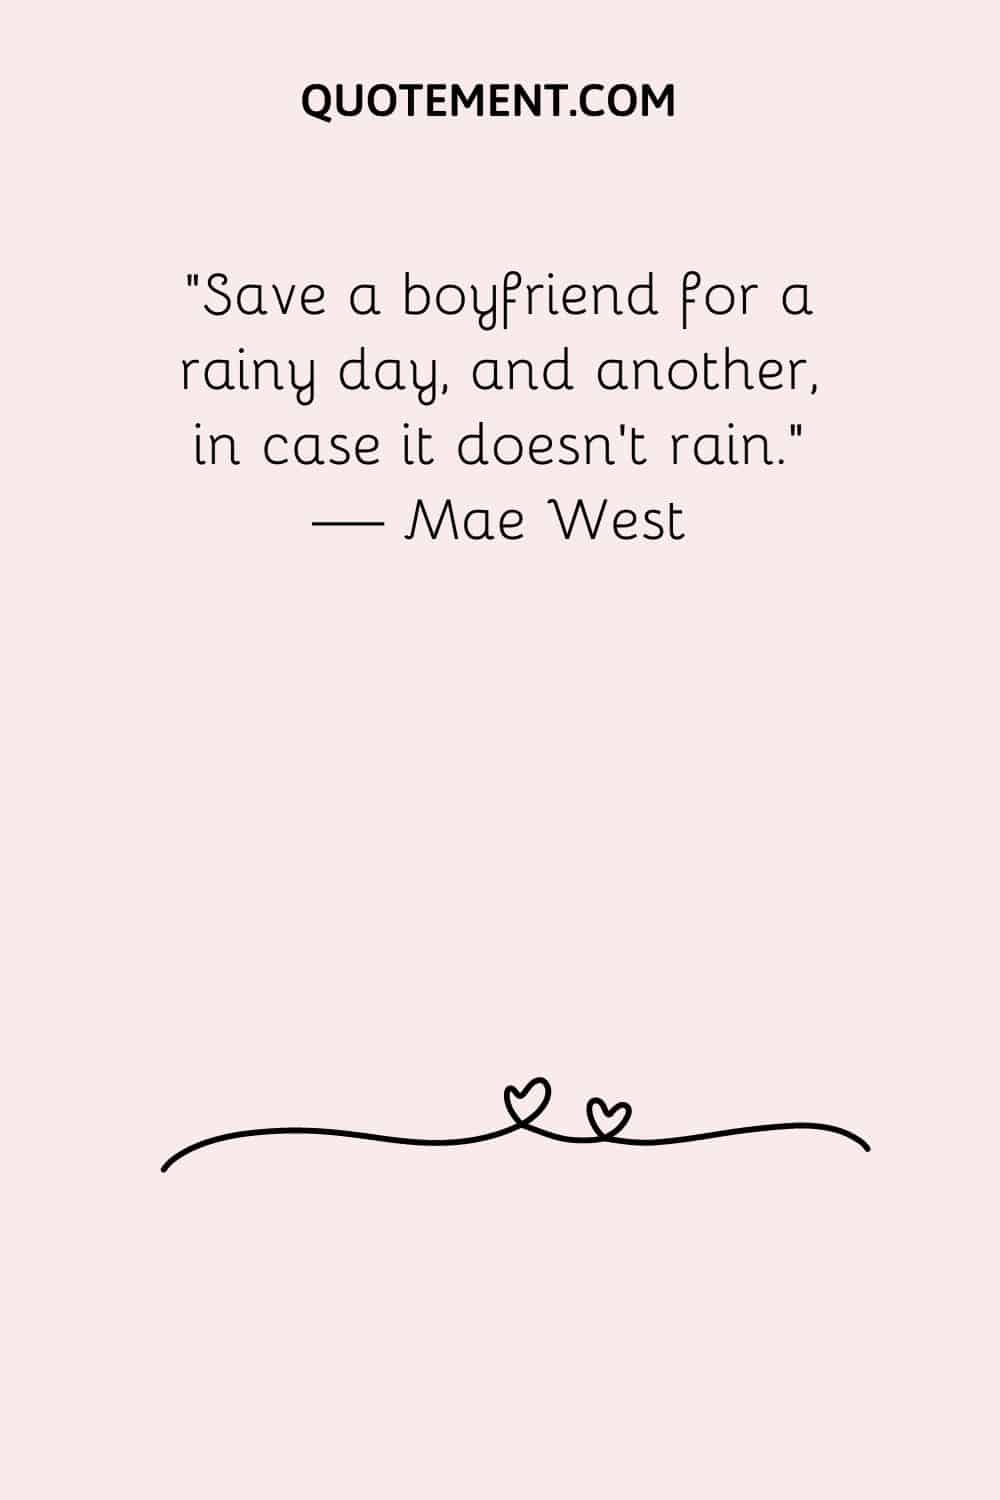 Save a boyfriend for a rainy day, and another, in case it doesn’t rain